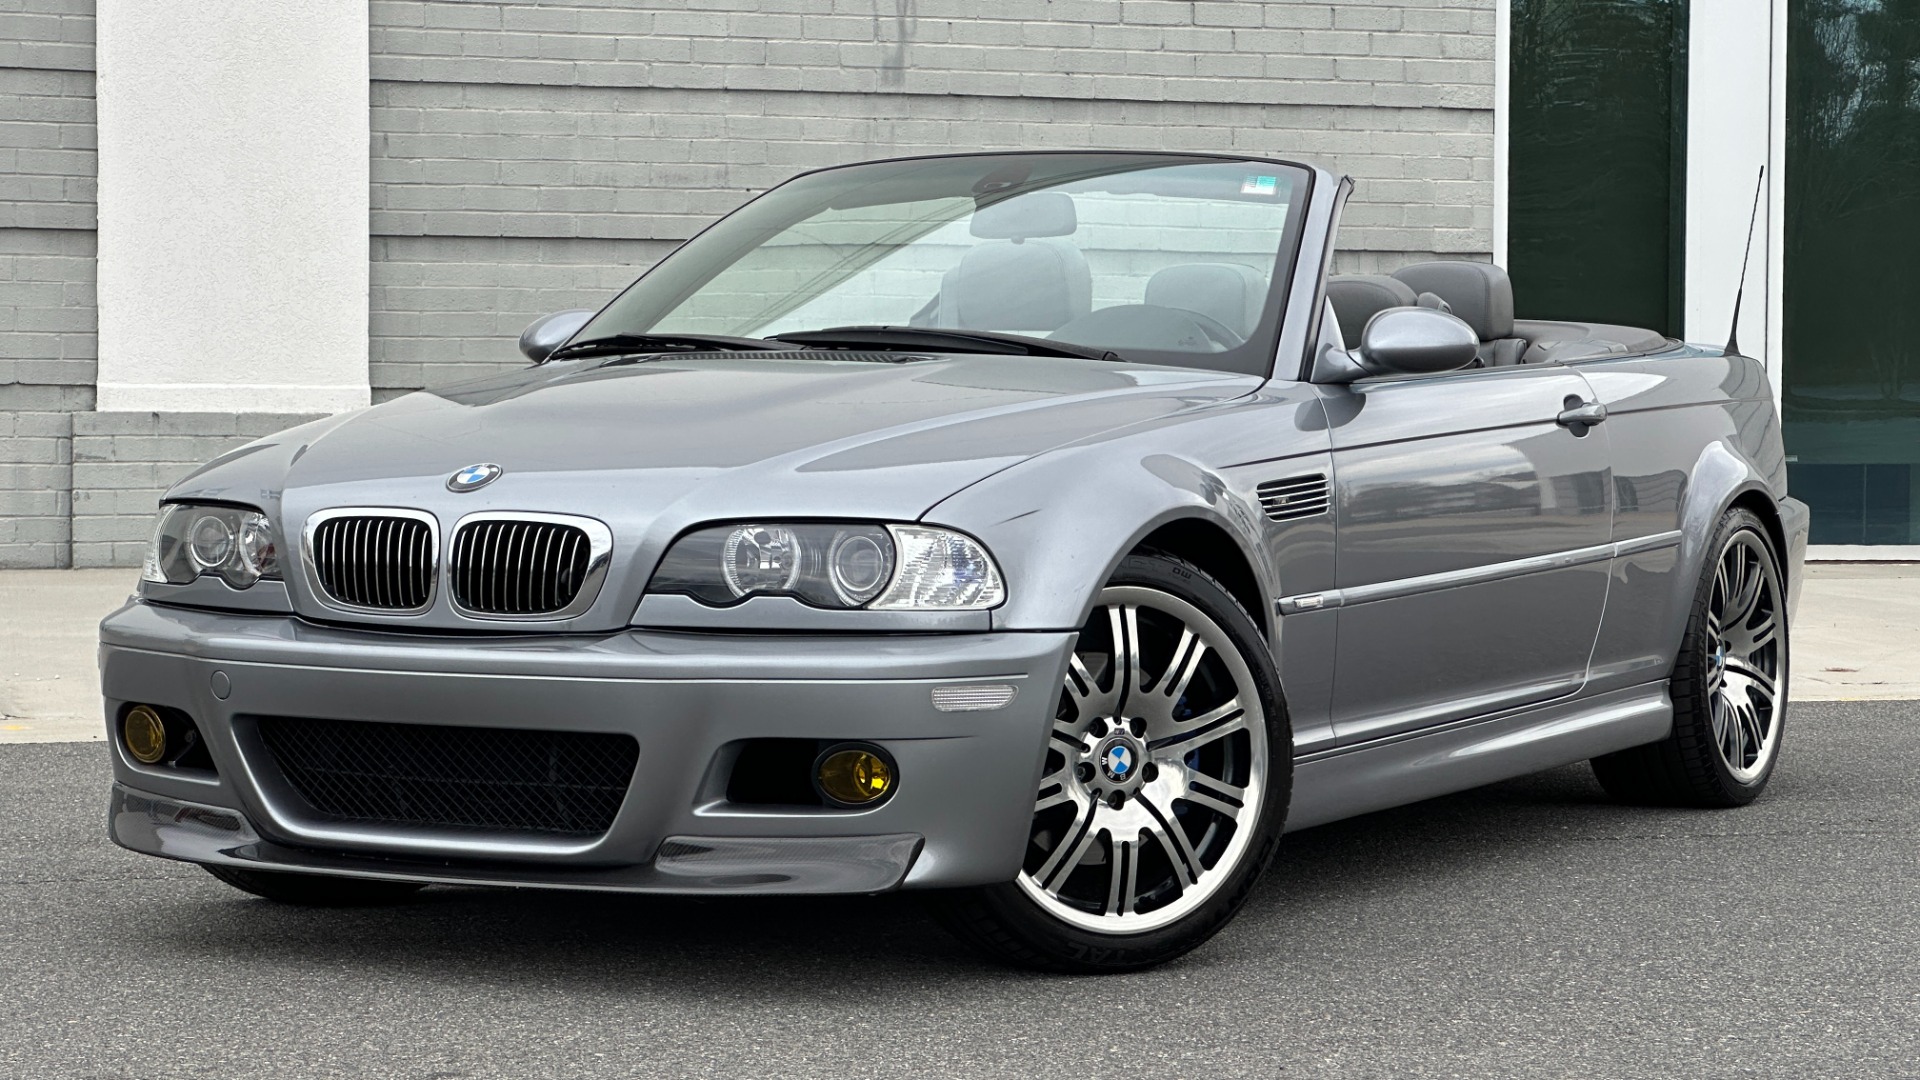 Used 2006 BMW M3 CONVERTIBLE / SMG AUTO / LEATHER / INLINE 6CYL / CARBON FIBER for sale $24,995 at Formula Imports in Charlotte NC 28227 1